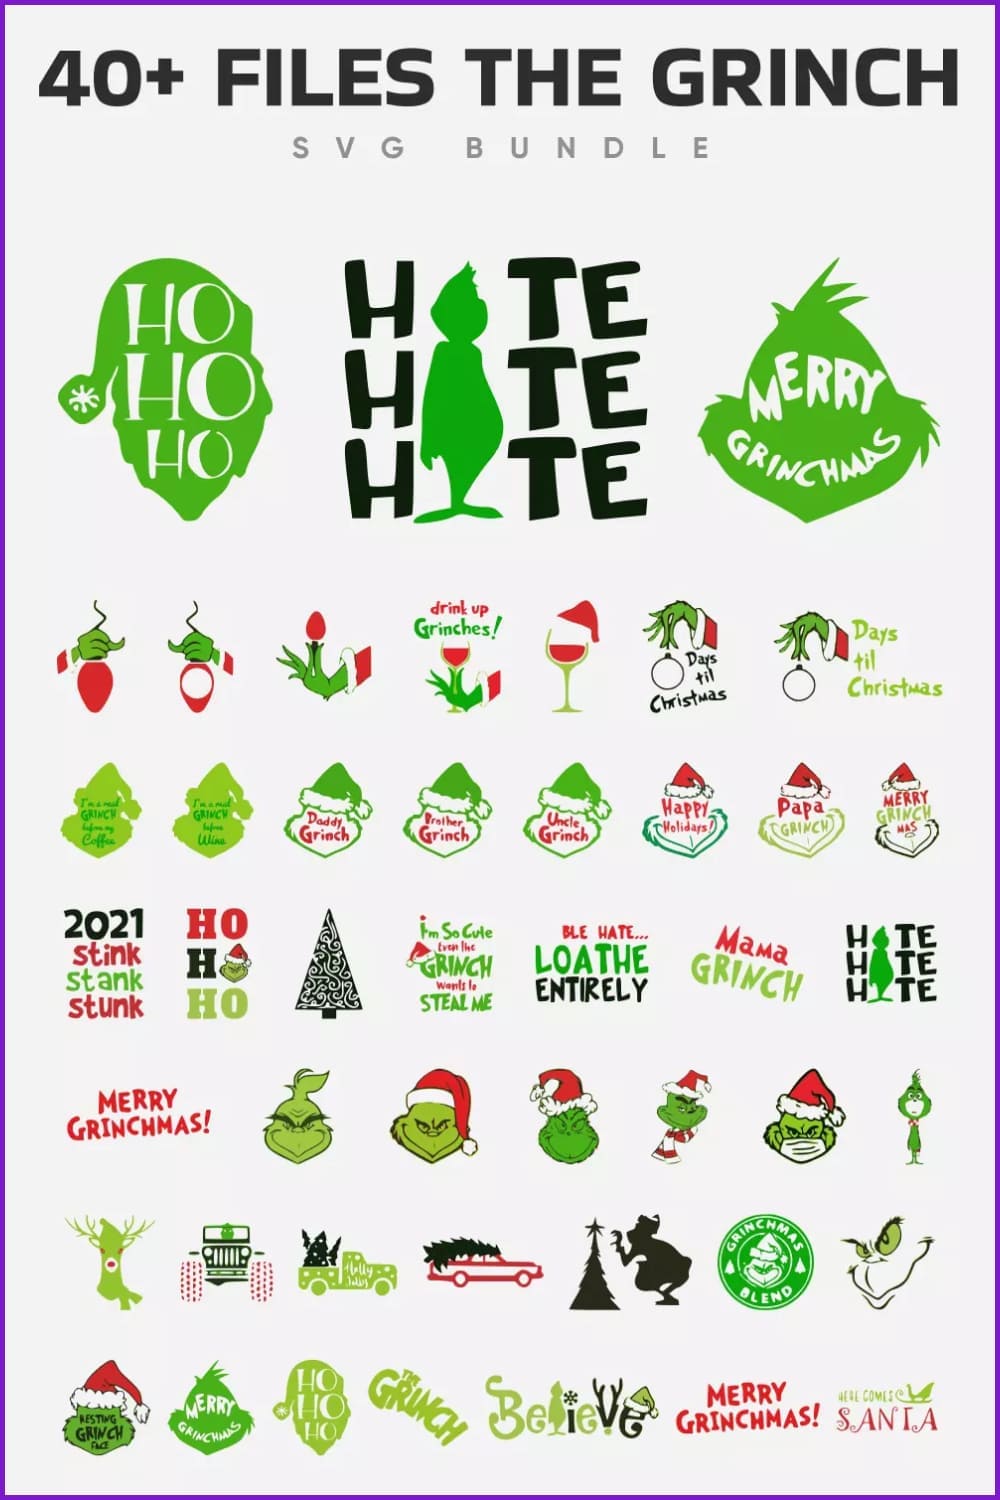 Grinch icons with signs.